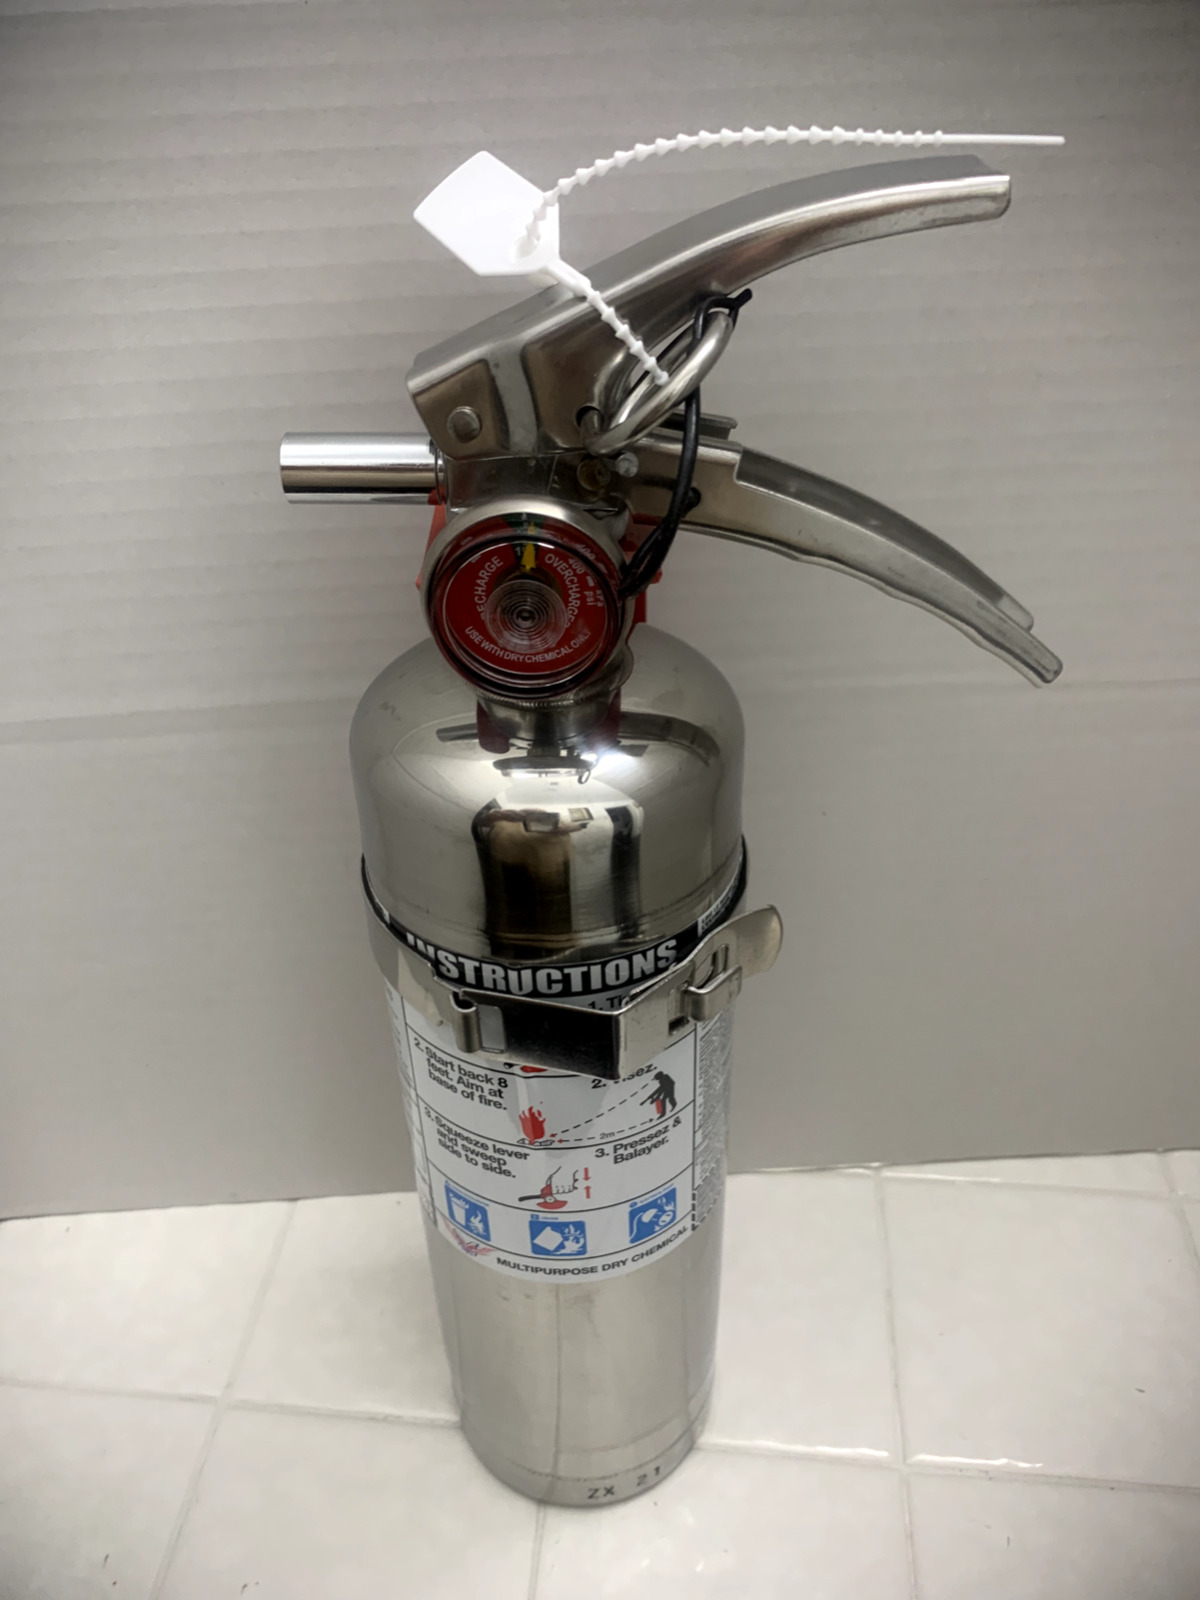 ✅🔥NEW- CHROME/STAINLESS STEEL 2 ½ ABC FIRE EXTINGUISHER NO RUST STAINLESS